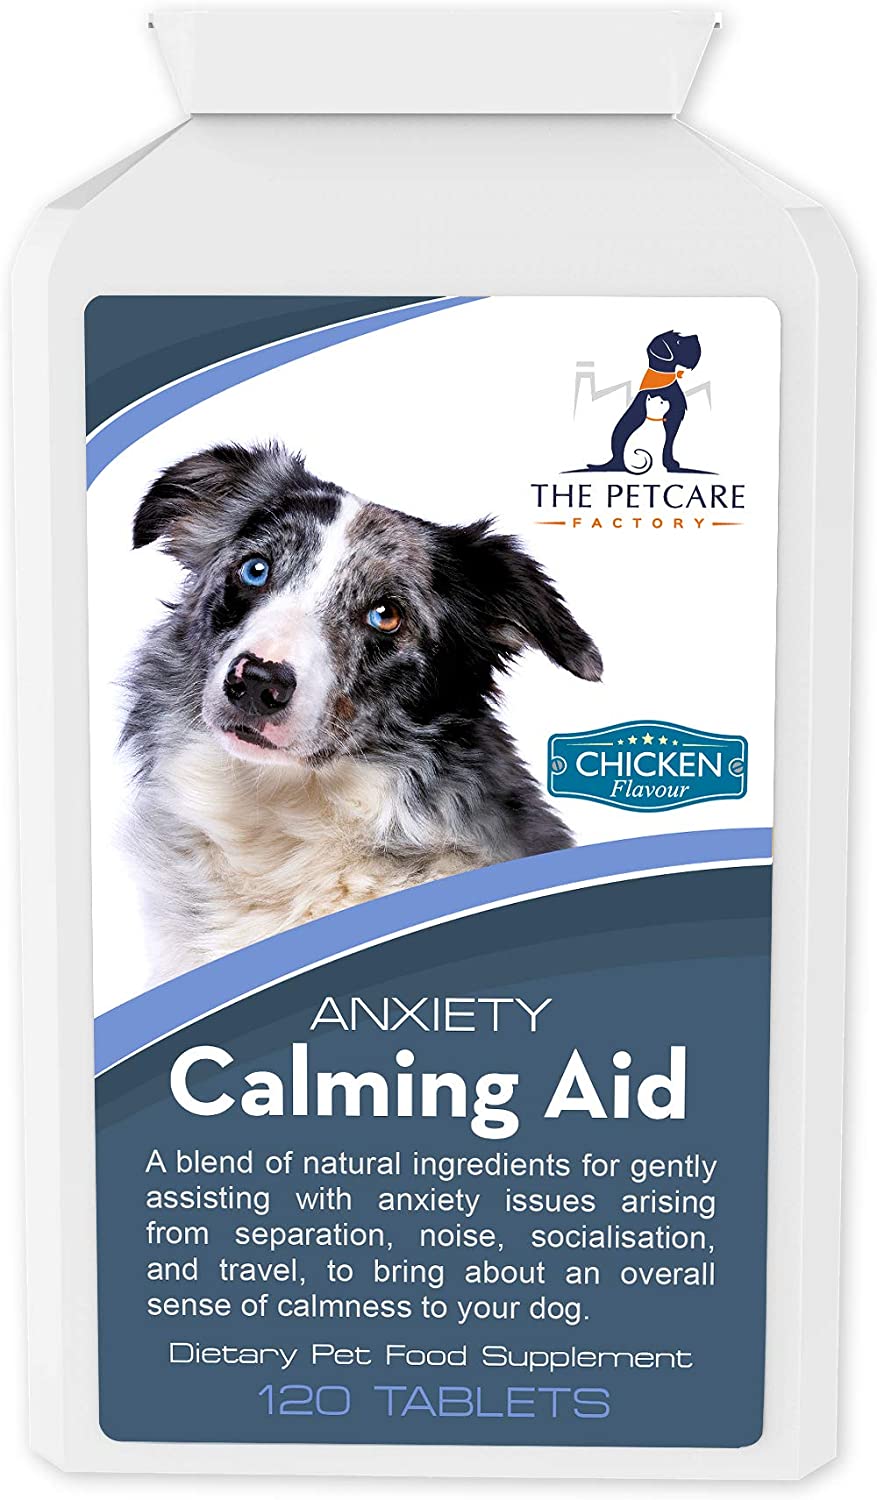 taurine dosage for anxiety